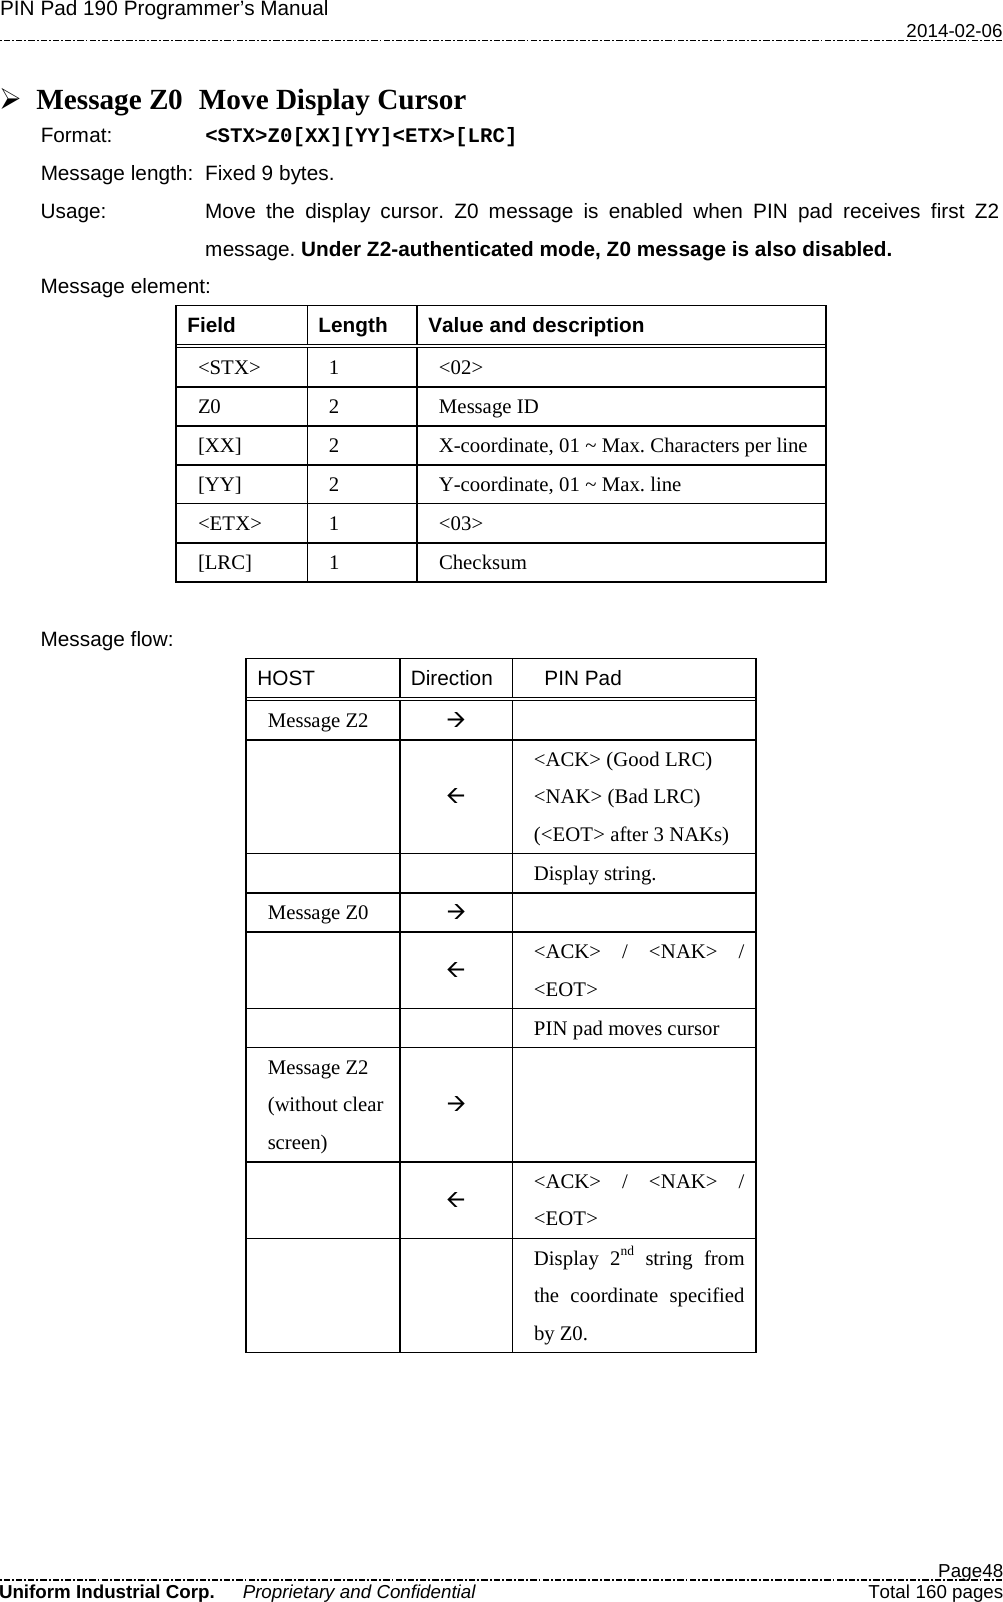 PIN Pad 190 Programmer’s Manual   2014-02-06  Page48 Uniform Industrial Corp. Proprietary and Confidential  Total 160 pages   Message Z0  Move Display Cursor Format:   &lt;STX&gt;Z0[XX][YY]&lt;ETX&gt;[LRC] Message length: Fixed 9 bytes. Usage: Move the display cursor.  Z0 message is enabled when PIN pad receives first Z2 message. Under Z2-authenticated mode, Z0 message is also disabled. Message element:   Field  Length  Value and description &lt;STX&gt;  1  &lt;02&gt; Z0  2  Message ID [XX]  2  X-coordinate, 01 ~ Max. Characters per line [YY]  2  Y-coordinate, 01 ~ Max. line &lt;ETX&gt;  1  &lt;03&gt; [LRC]  1  Checksum  Message flow: HOST Direction   PIN Pad Message Z2      &lt;ACK&gt; (Good LRC) &lt;NAK&gt; (Bad LRC) (&lt;EOT&gt; after 3 NAKs)     Display string. Message Z0     &lt;ACK&gt;  /  &lt;NAK&gt;  / &lt;EOT&gt;       PIN pad moves cursor Message Z2 (without clear screen)     &lt;ACK&gt;  /  &lt;NAK&gt;  / &lt;EOT&gt;     Display 2nd string from the coordinate specified by Z0.  